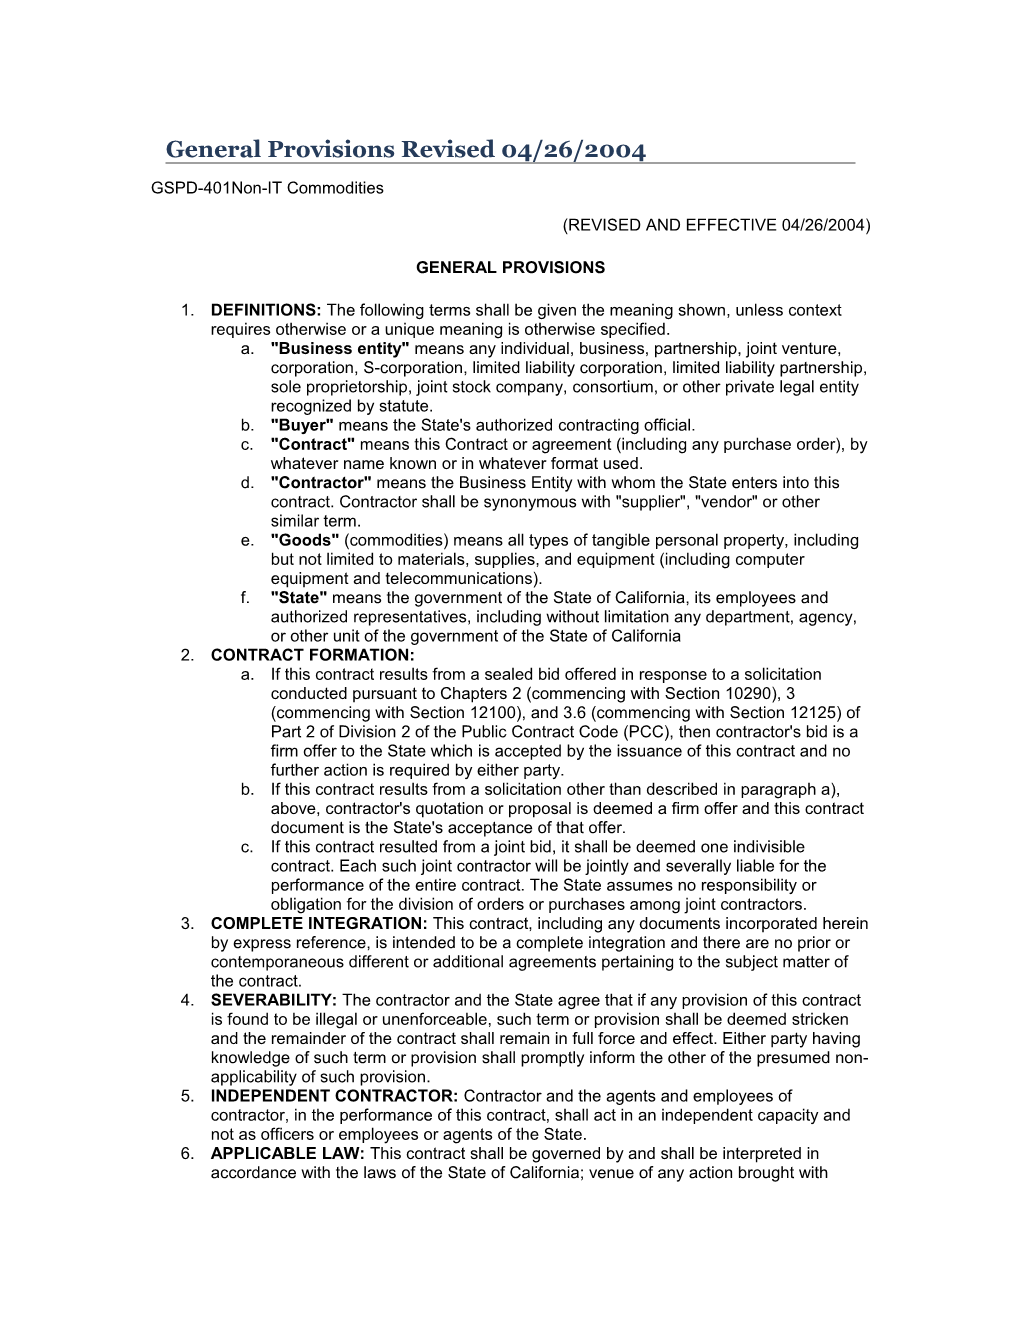 General Provisions Revised 04/26/2004